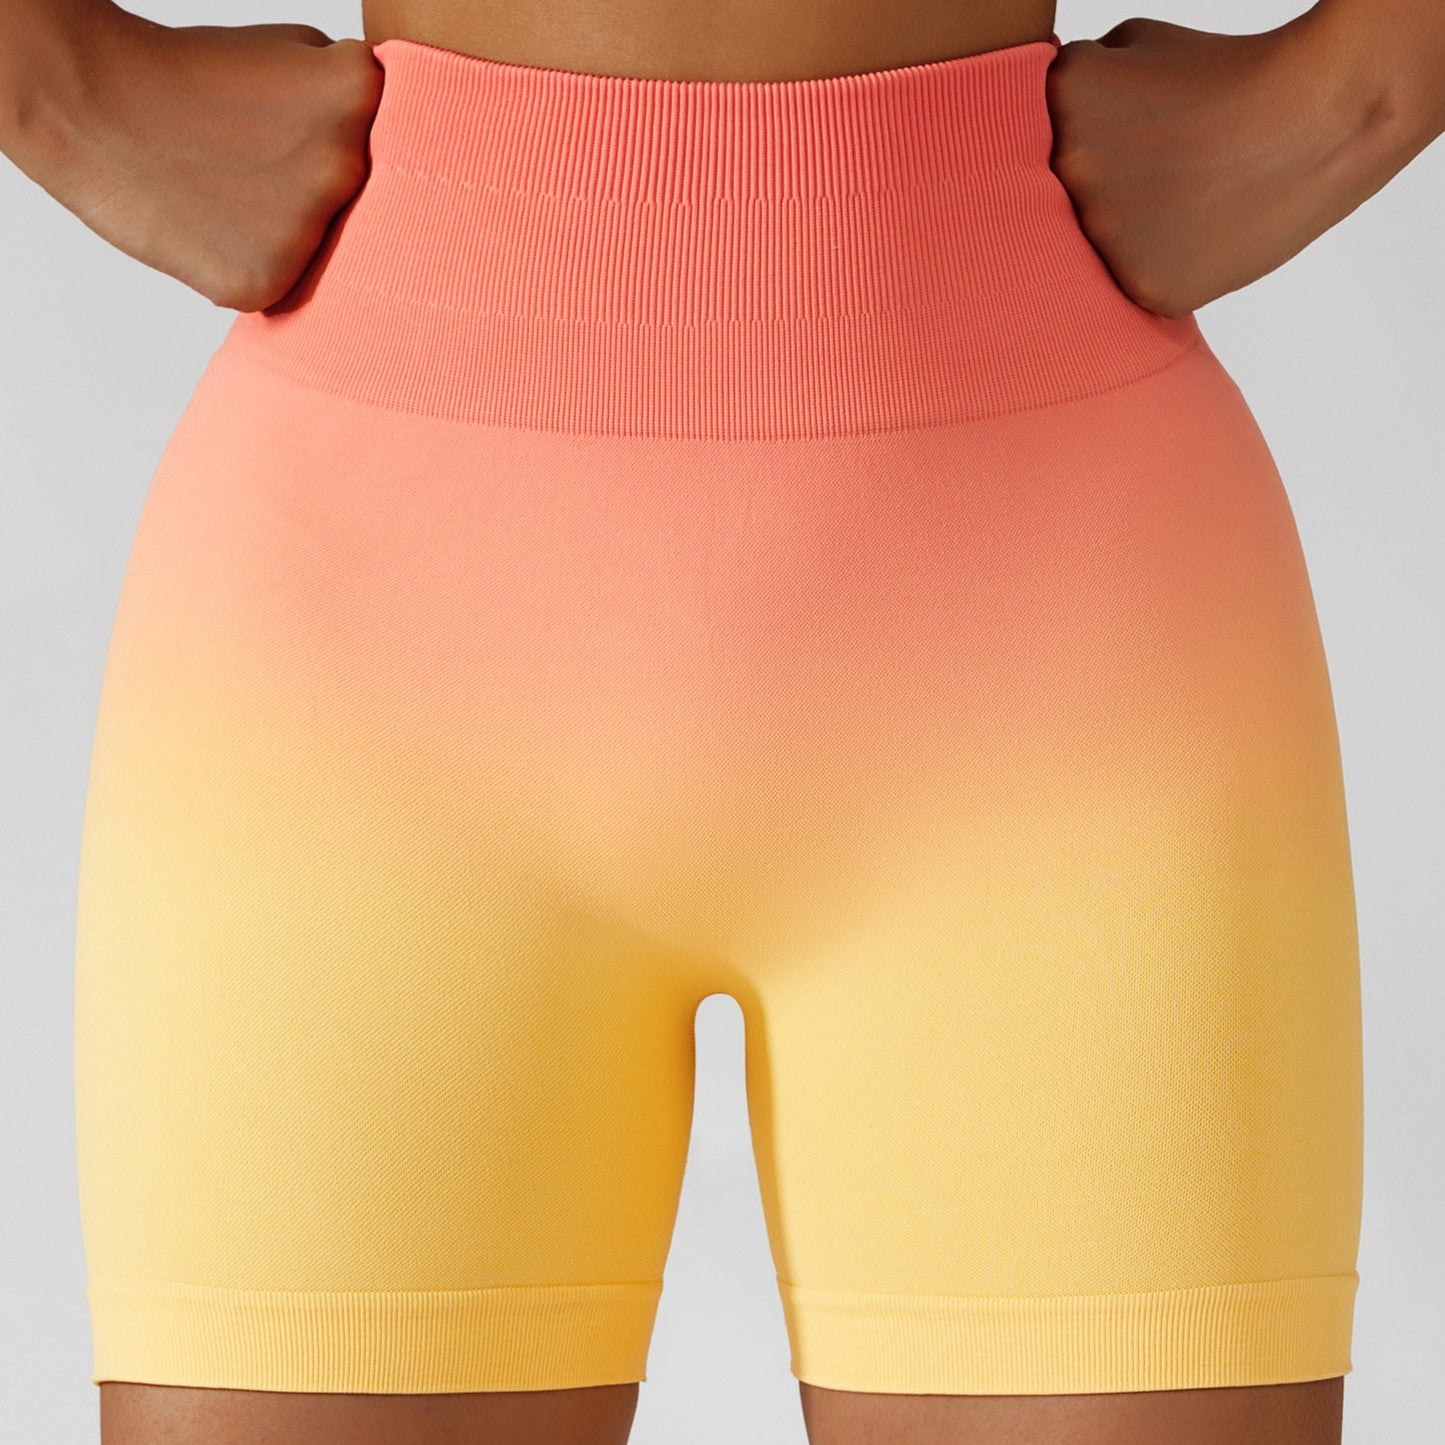 Gradient Seamless Yoga Shorts Gym Running Workout Tight Sports Shorts High Waist Elastic Butt Lifting Fitness Pants Shorts The Clothing Company Sydney